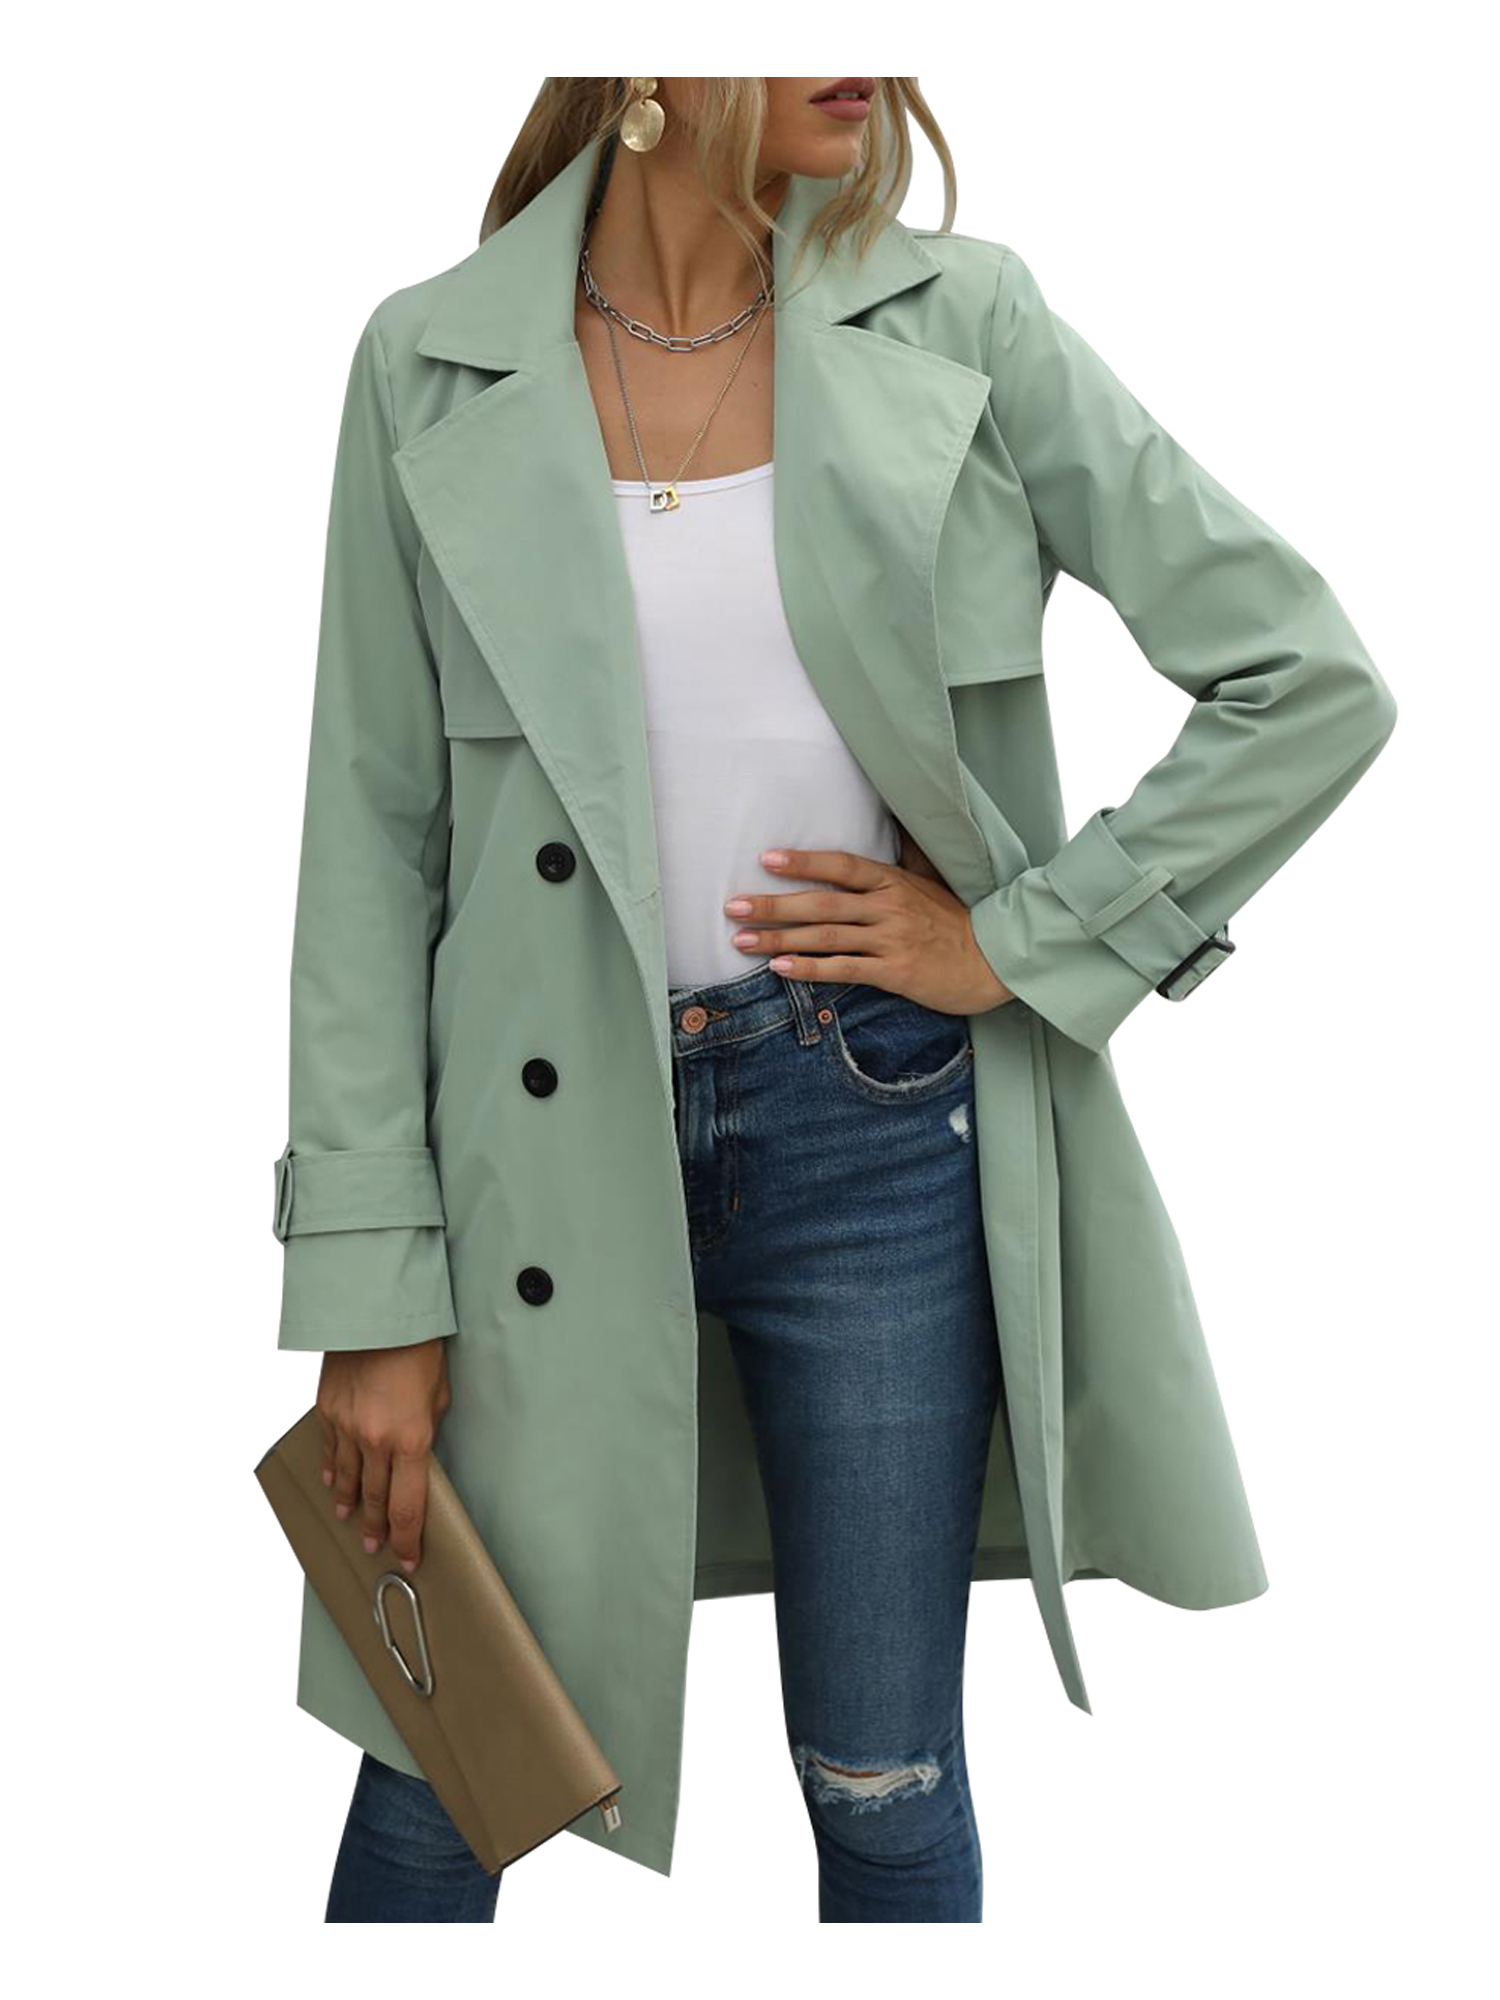 Spring hue Women Jacket Long Sleeve Lapel Double Breasted Belted Trench Coat - image 2 of 6